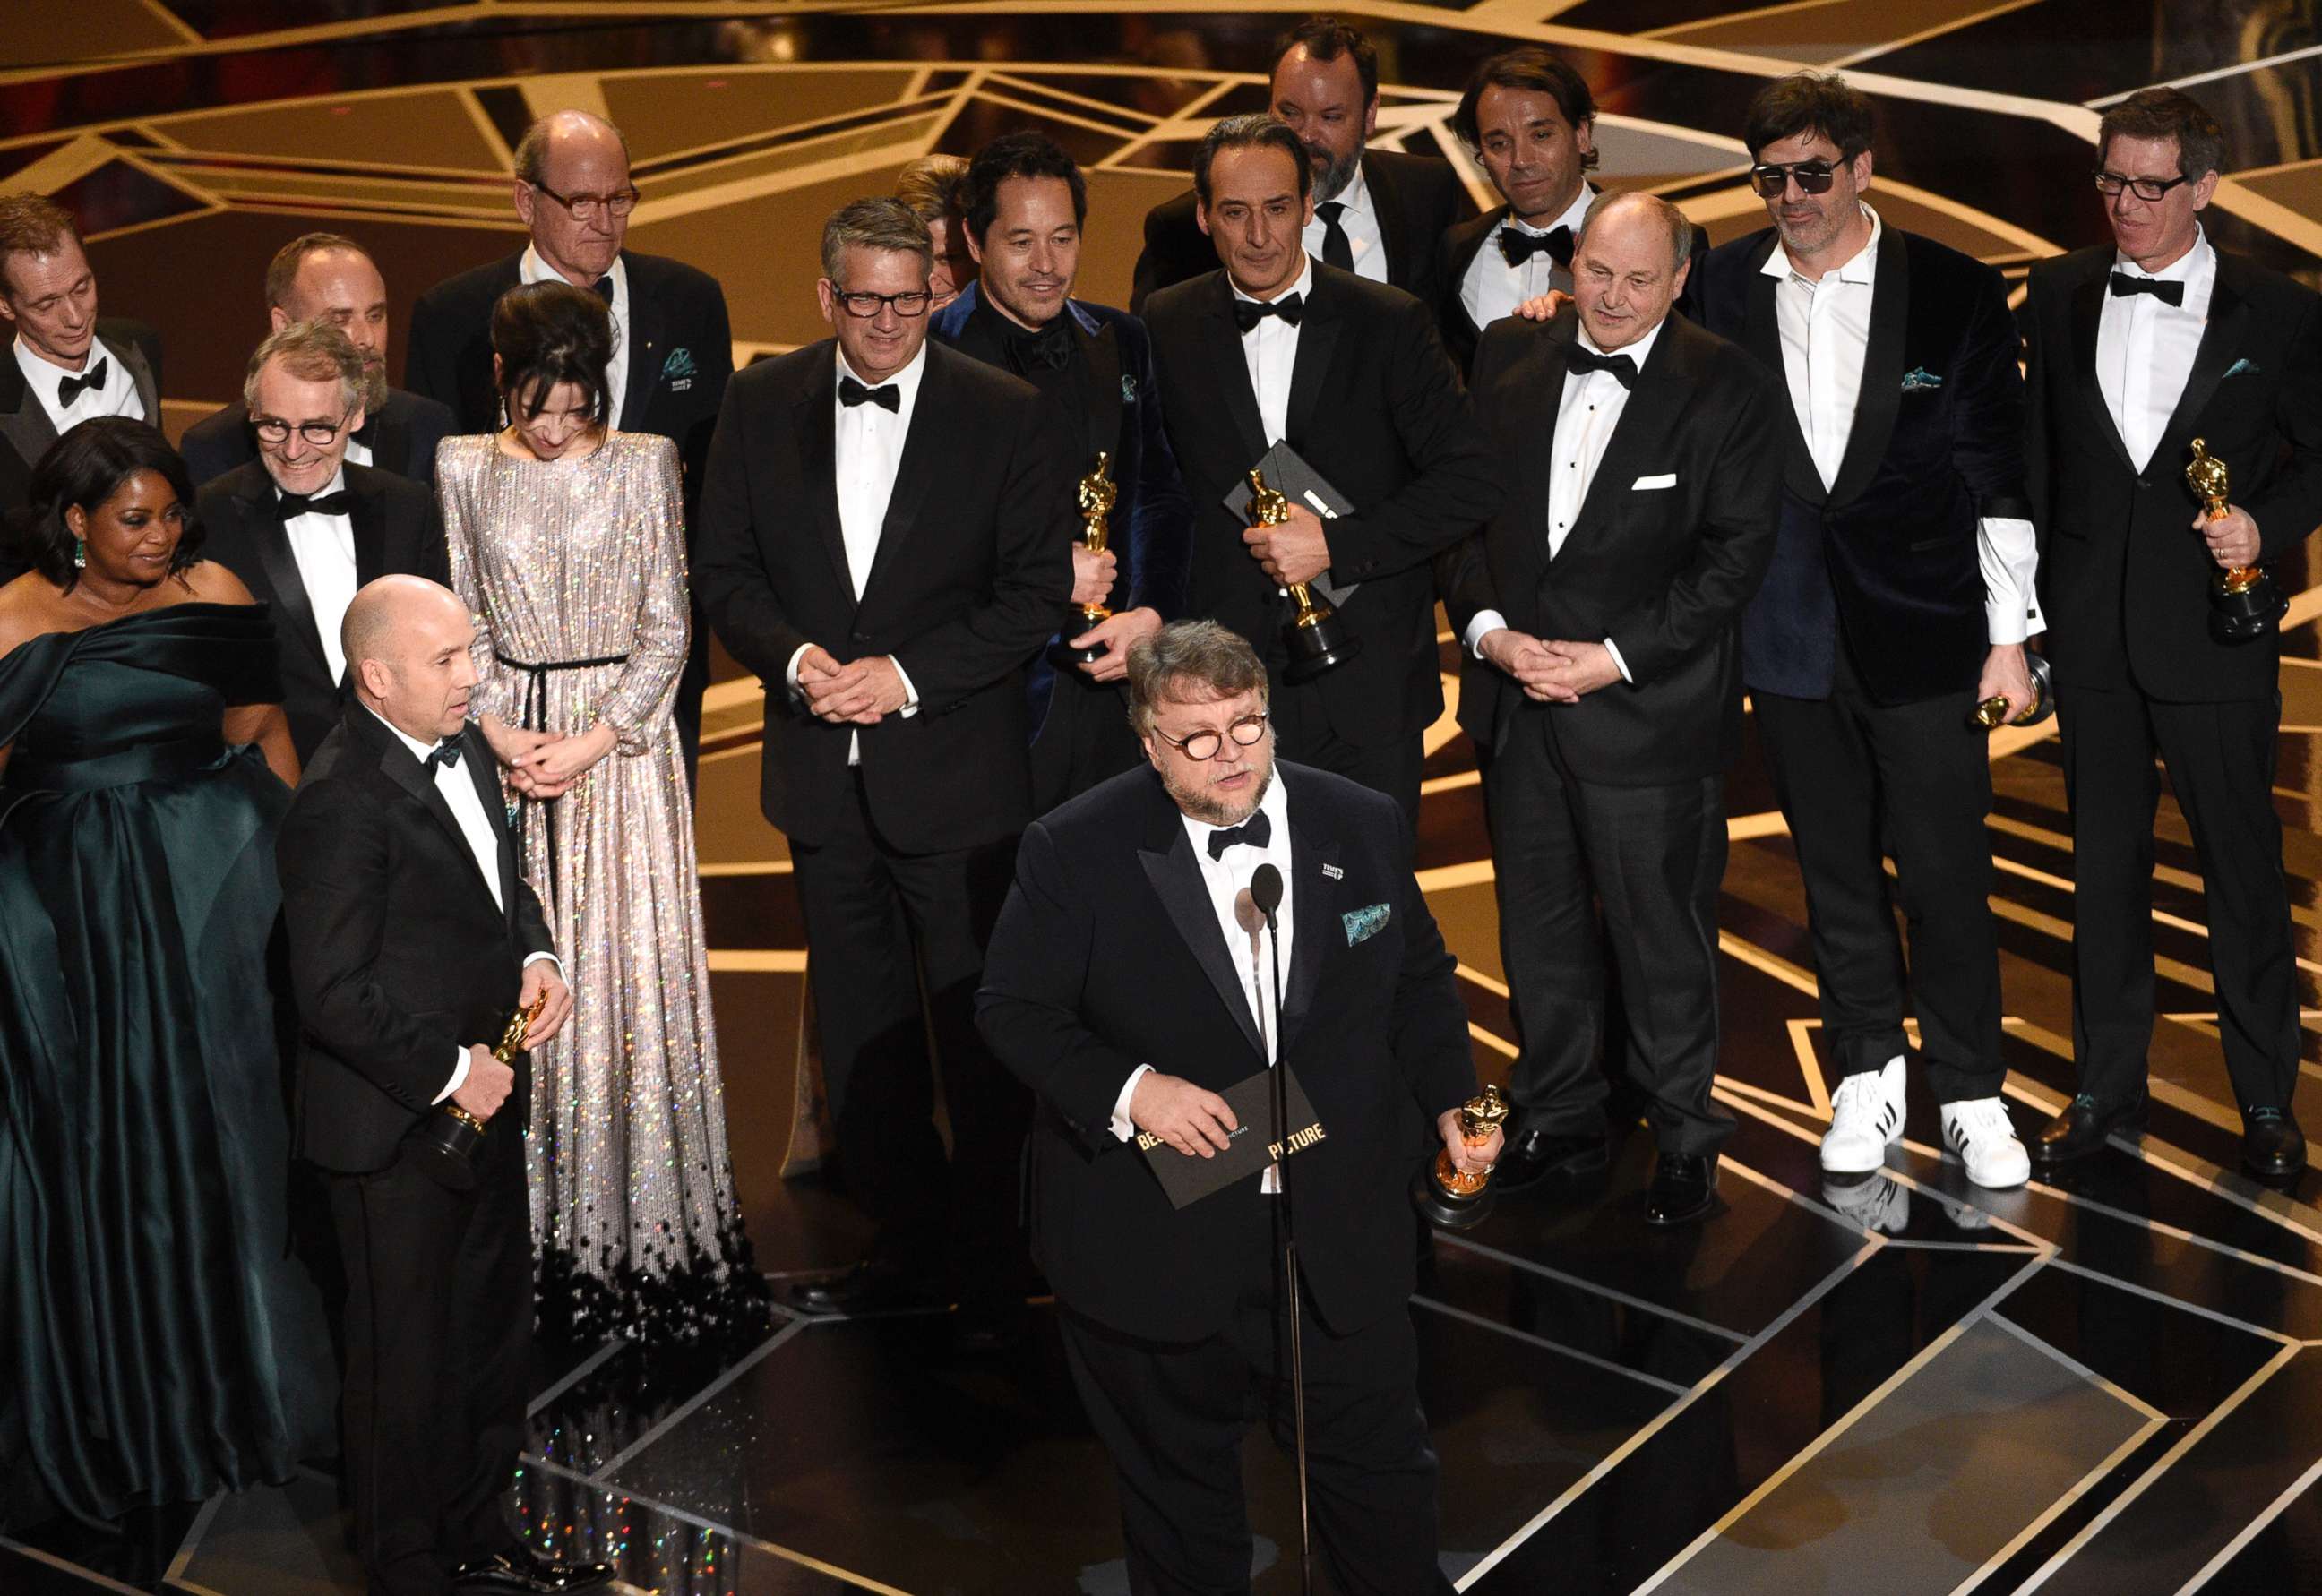 PHOTO: Guillermo del Toro and the cast and crew of "The Shape of Water" accept the award for best picture at the Oscars, March 4, 2018, at the Dolby Theatre in Los Angeles.  